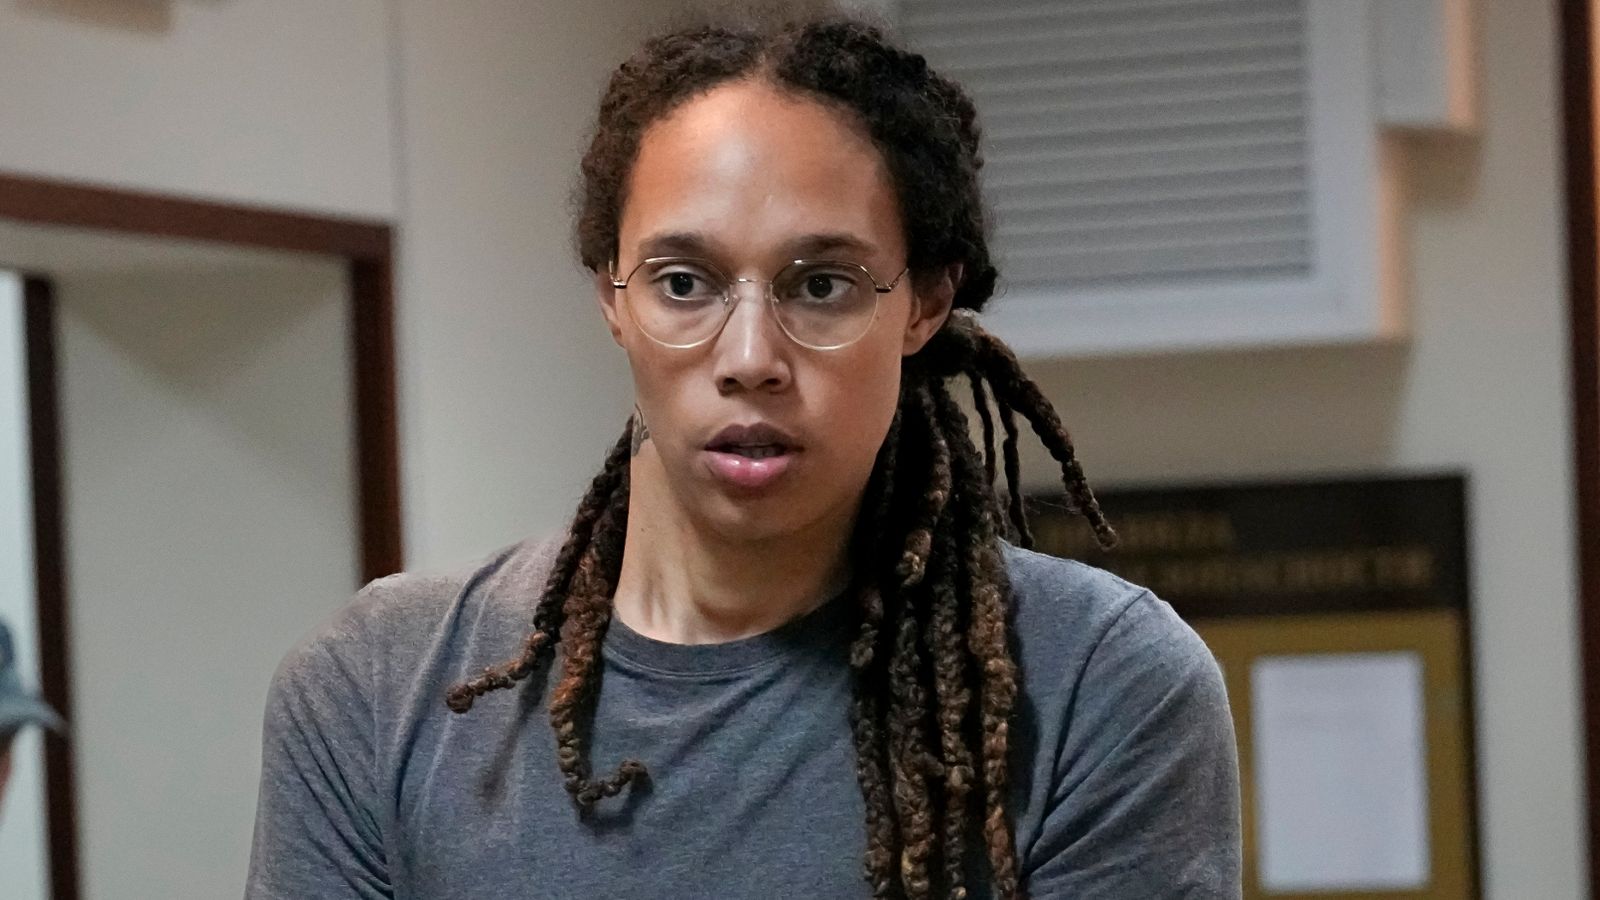 brittney-griner-s-appeal-against-her-nine-year-prison-sentence-rejected-by-russian-court